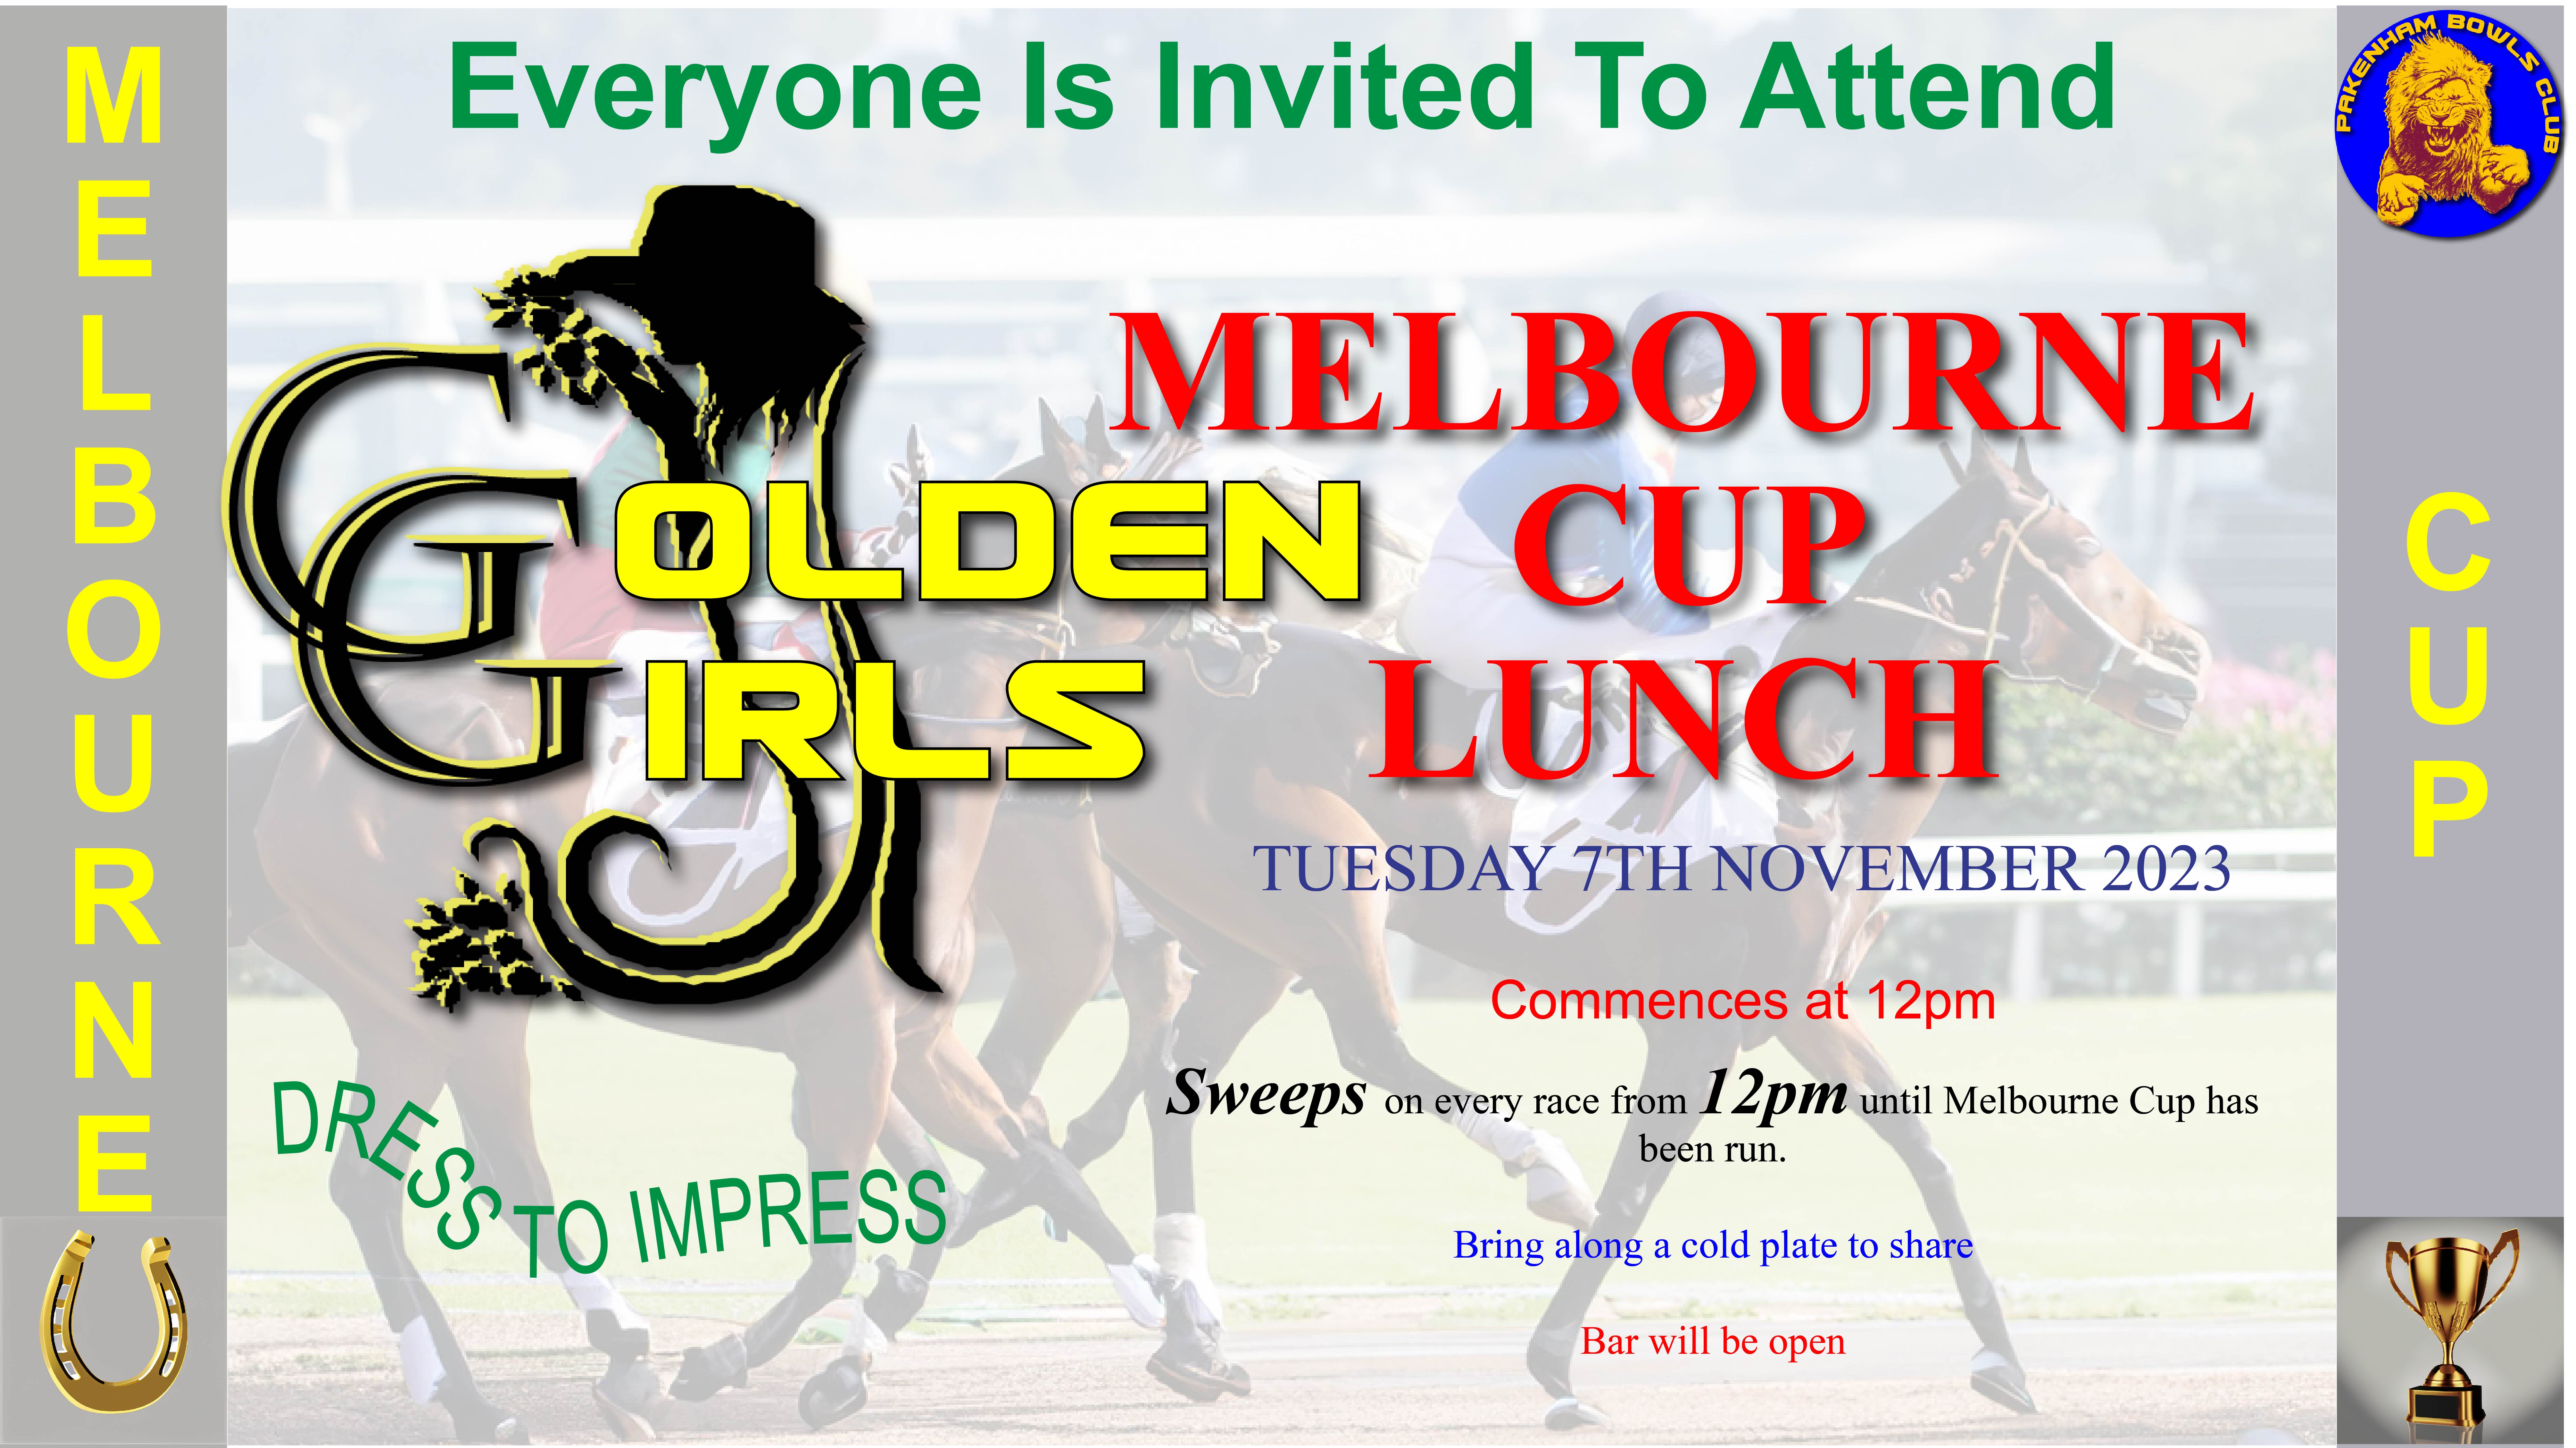 Golden Girls Melbourne Cup Lunch 7th November Everyone Welcome Dress to Impress Tuesday 7th November, Commences at 12pm. Sweeps on every race from 12pm until Melbourne Cup has been run. Bring along a cold plate to share. Bar will be open.